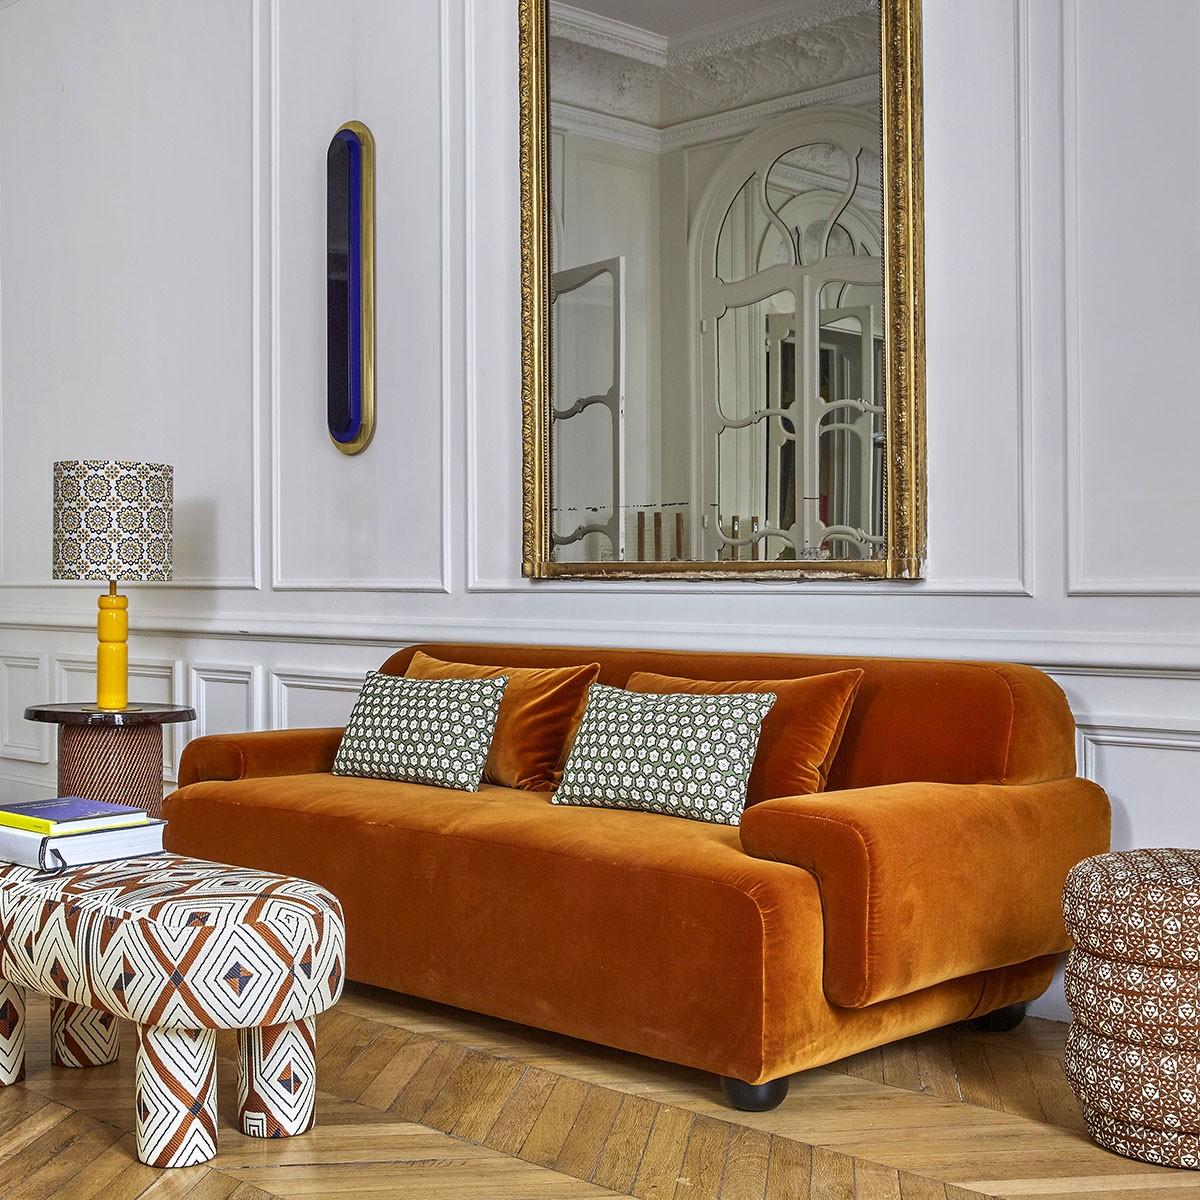 Popus editions Lena 2.5 seater sofa in brown como velvet upholstery.

It looks like it's straight out of a movie, with its generous curves and wide armrests. It is a real invitation to spend long Sundays with the family, comfortably seated in